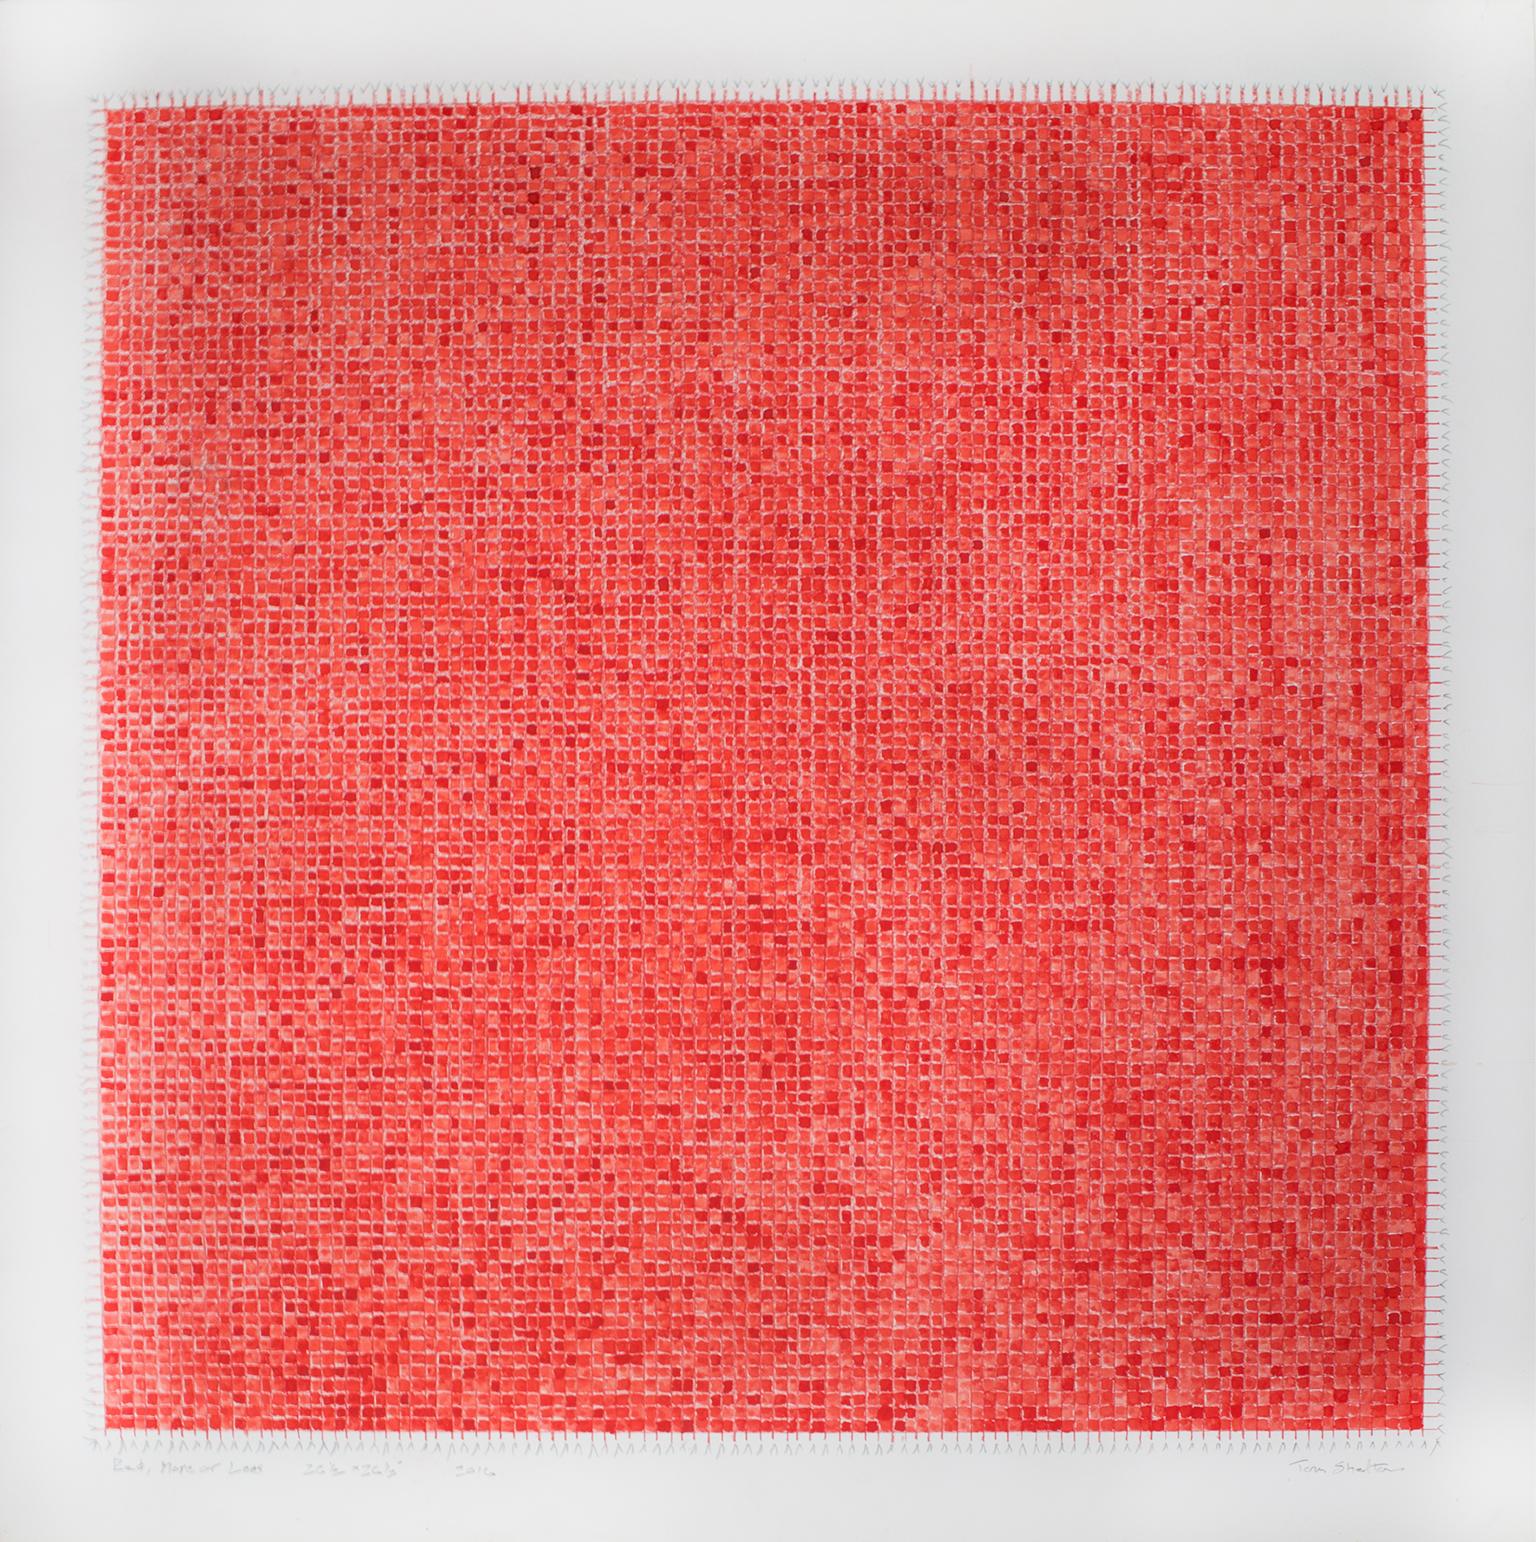 "Red, More or Less" is an original colored pencil & watercolor drawing on paper by Tom Shelton. It features a grid of red colored pencil filled in with red watercolor. The artist signed the piece lower right and titled it lower left. 

30" x 30"